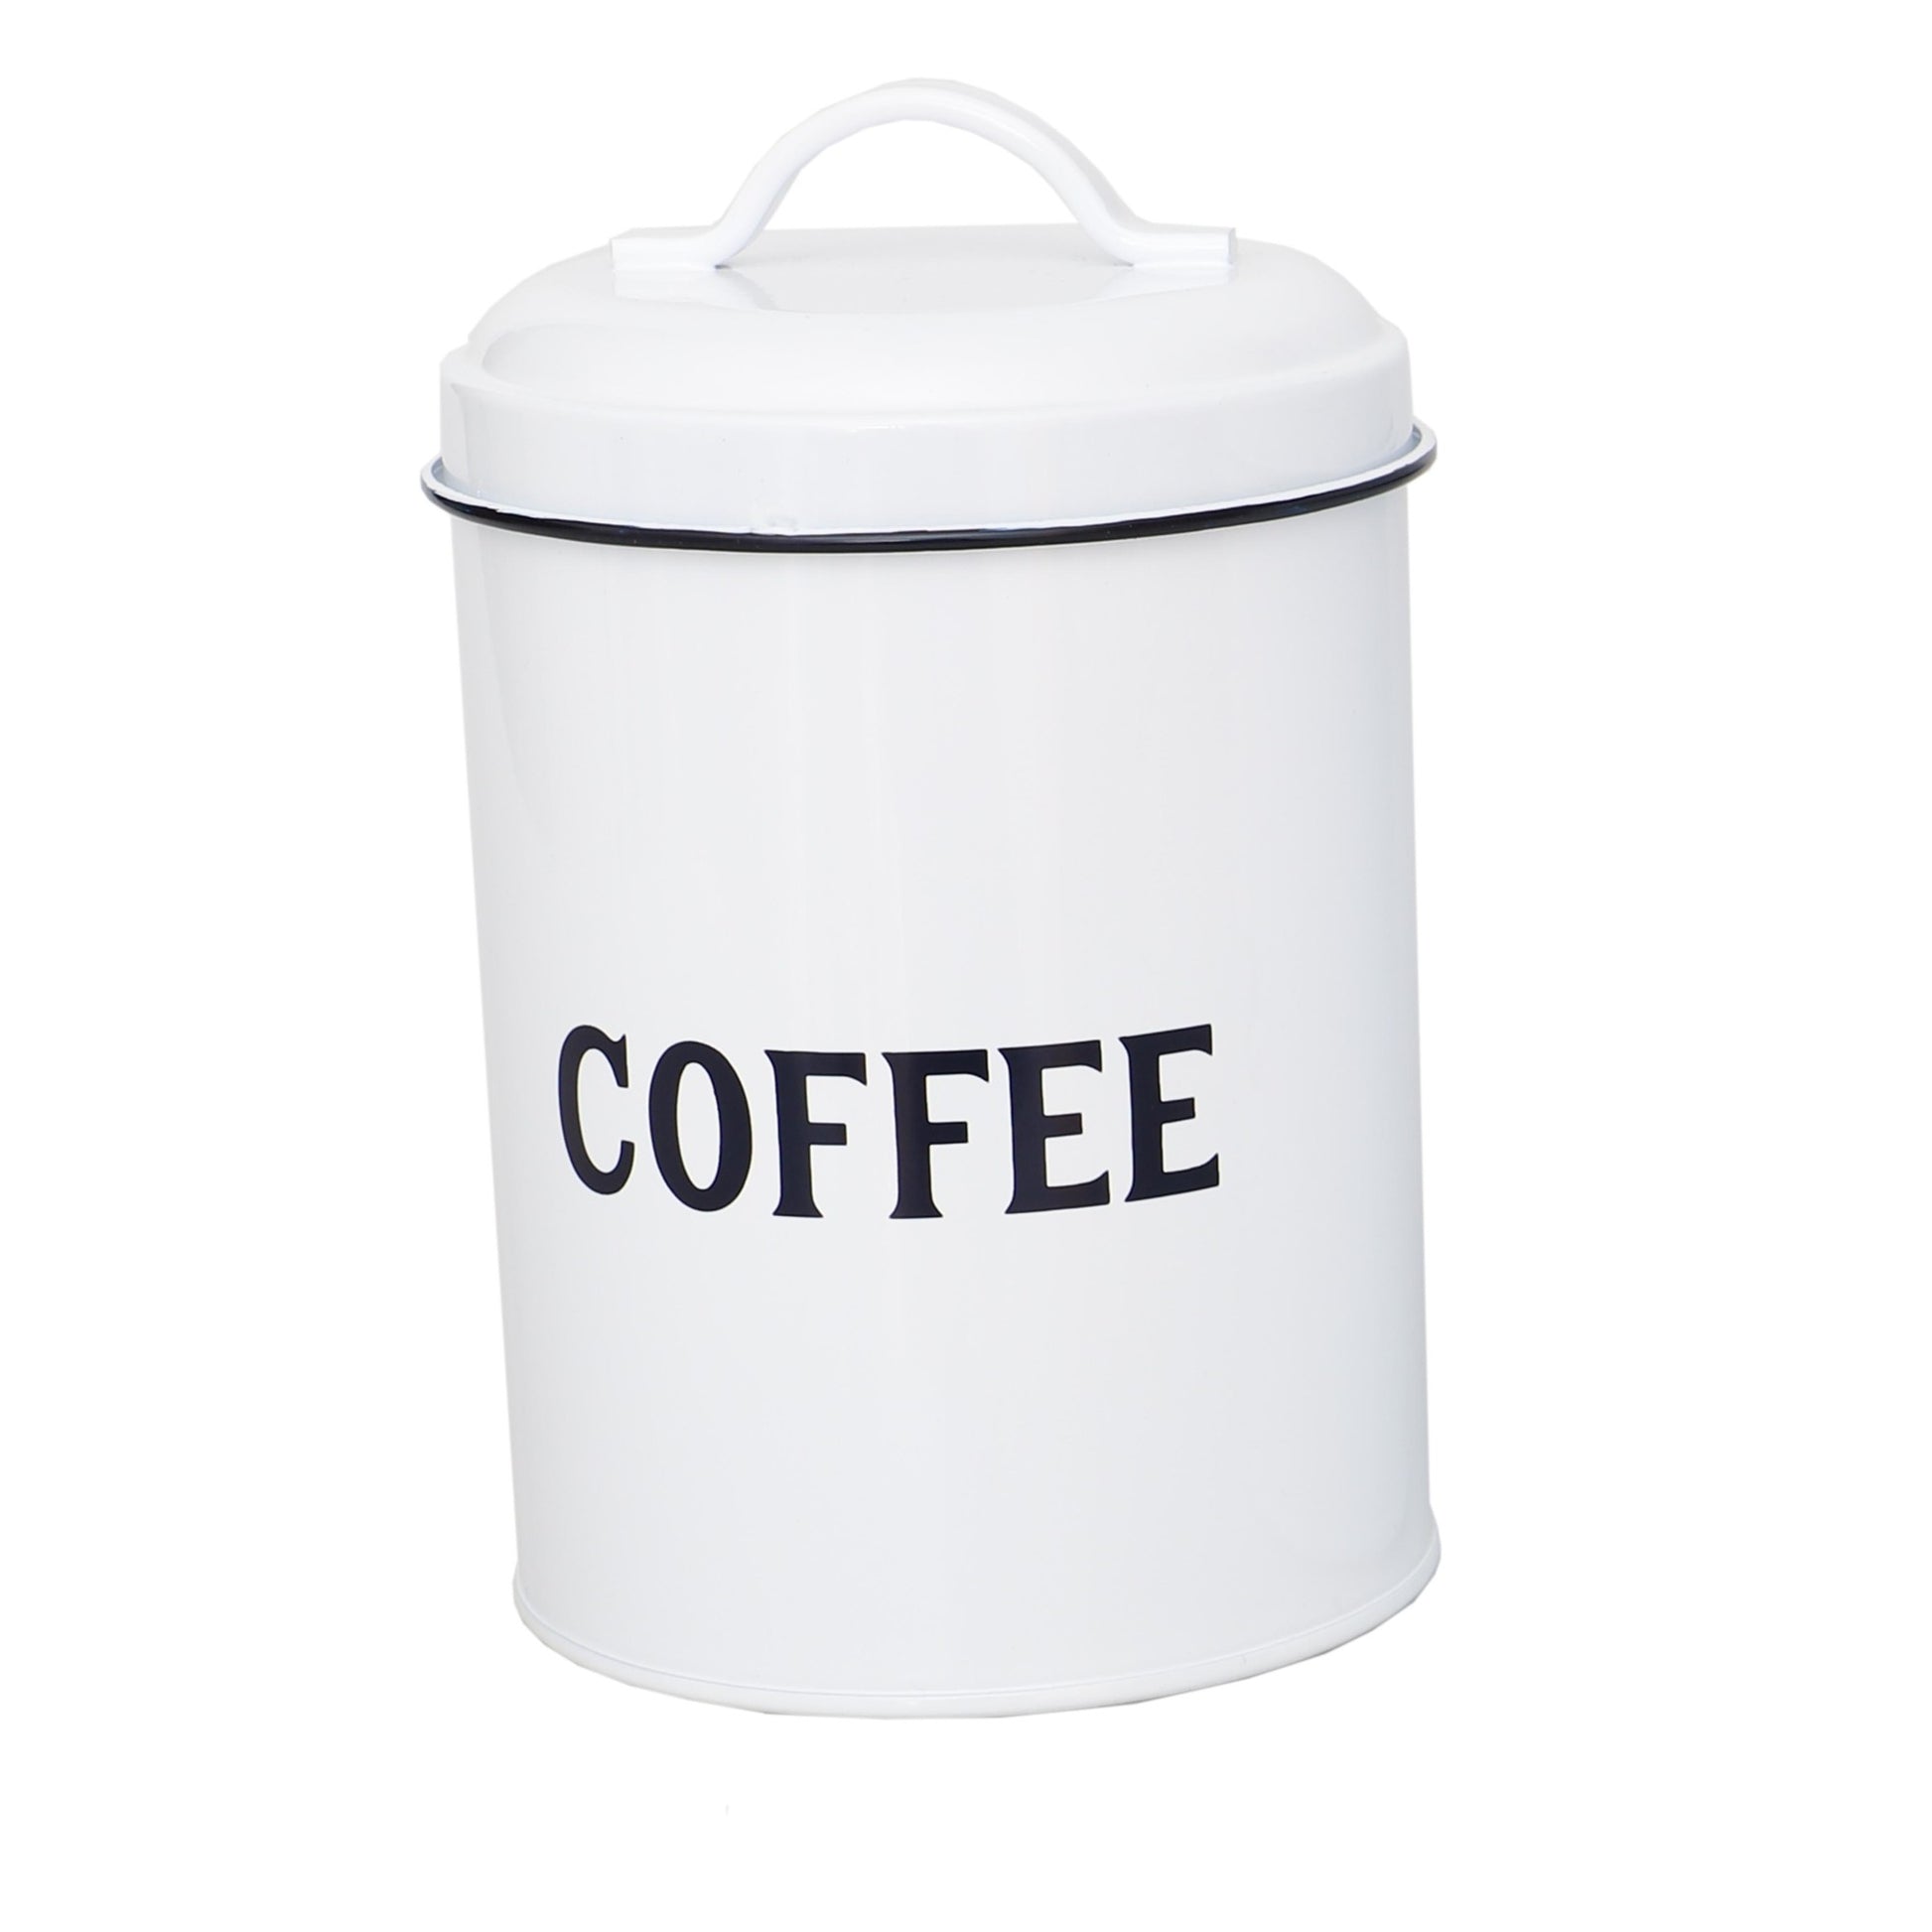 Home Basics Countryside Coffee Tin Canister, White - Coffee